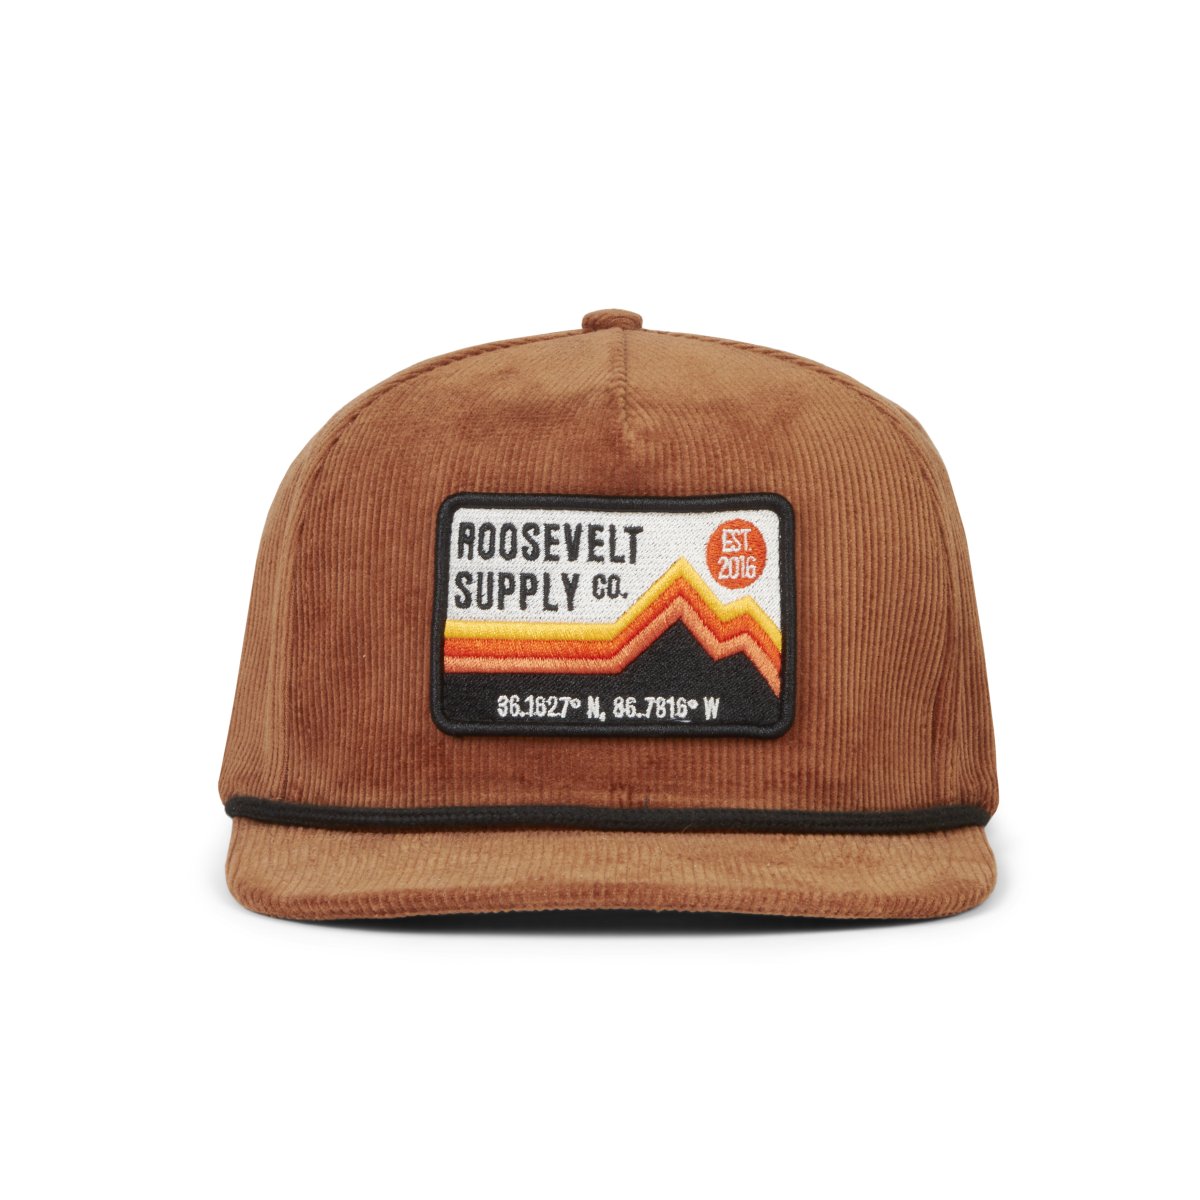 Tan Corduroy Rope Hat - Roosevelt Supply Co.